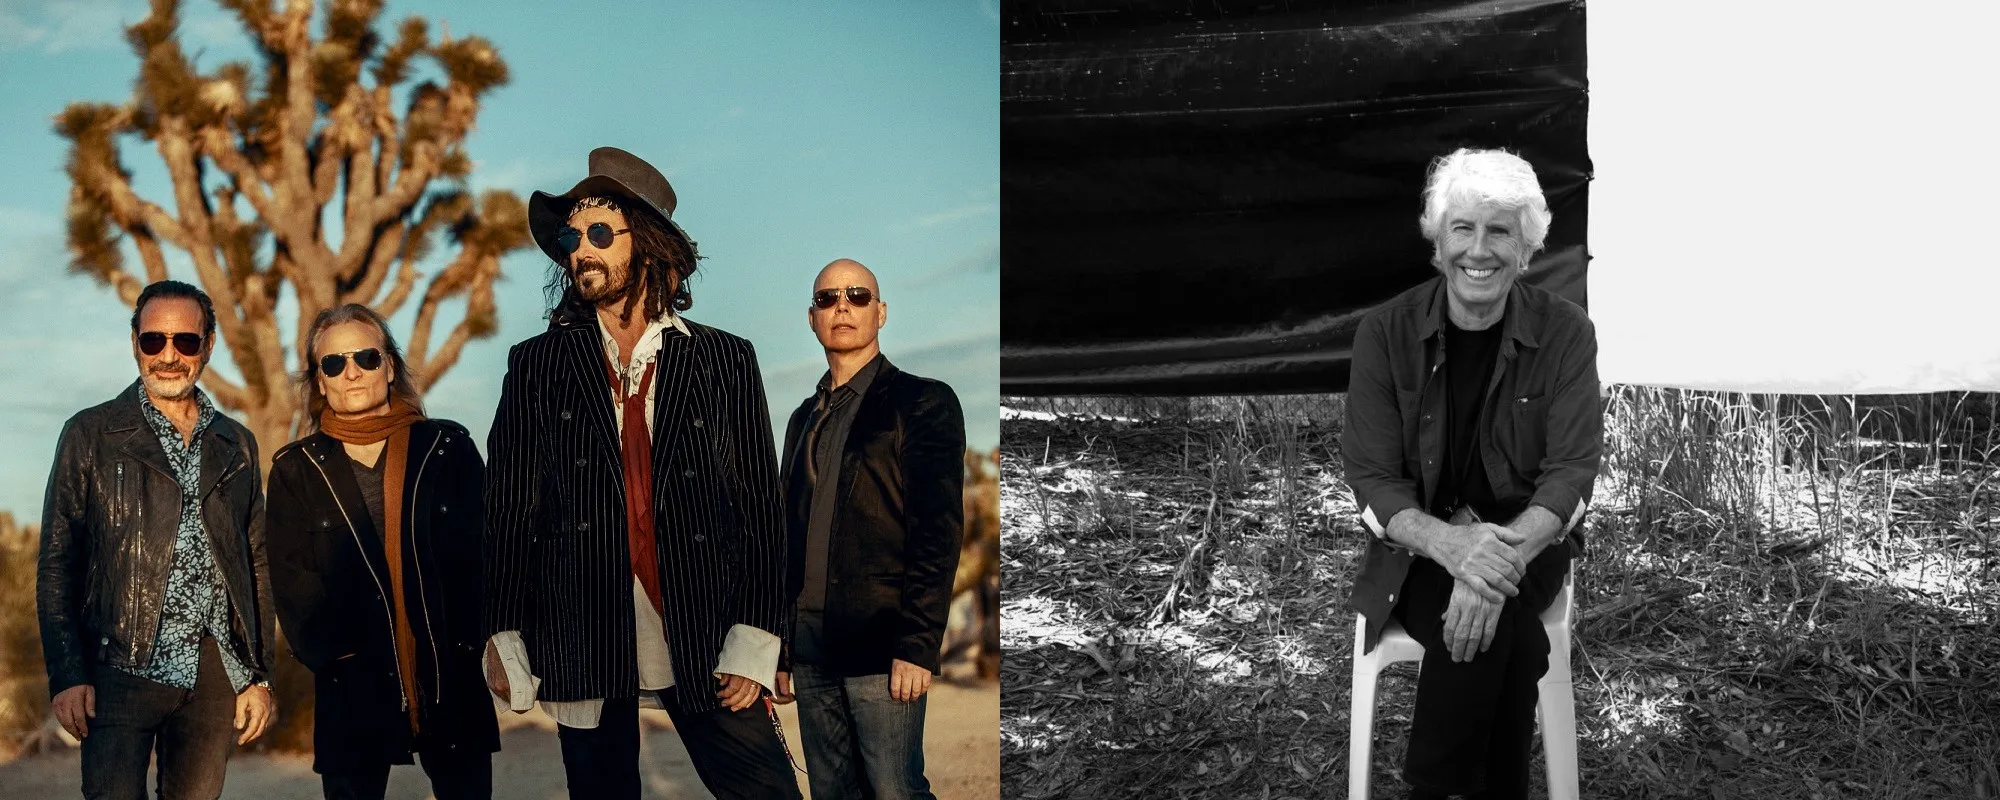 Tom Petty Guitarist Mike Campbell and His Band The Dirty Knobs Drop New Track Featuring Guest Vocals by Graham Nash